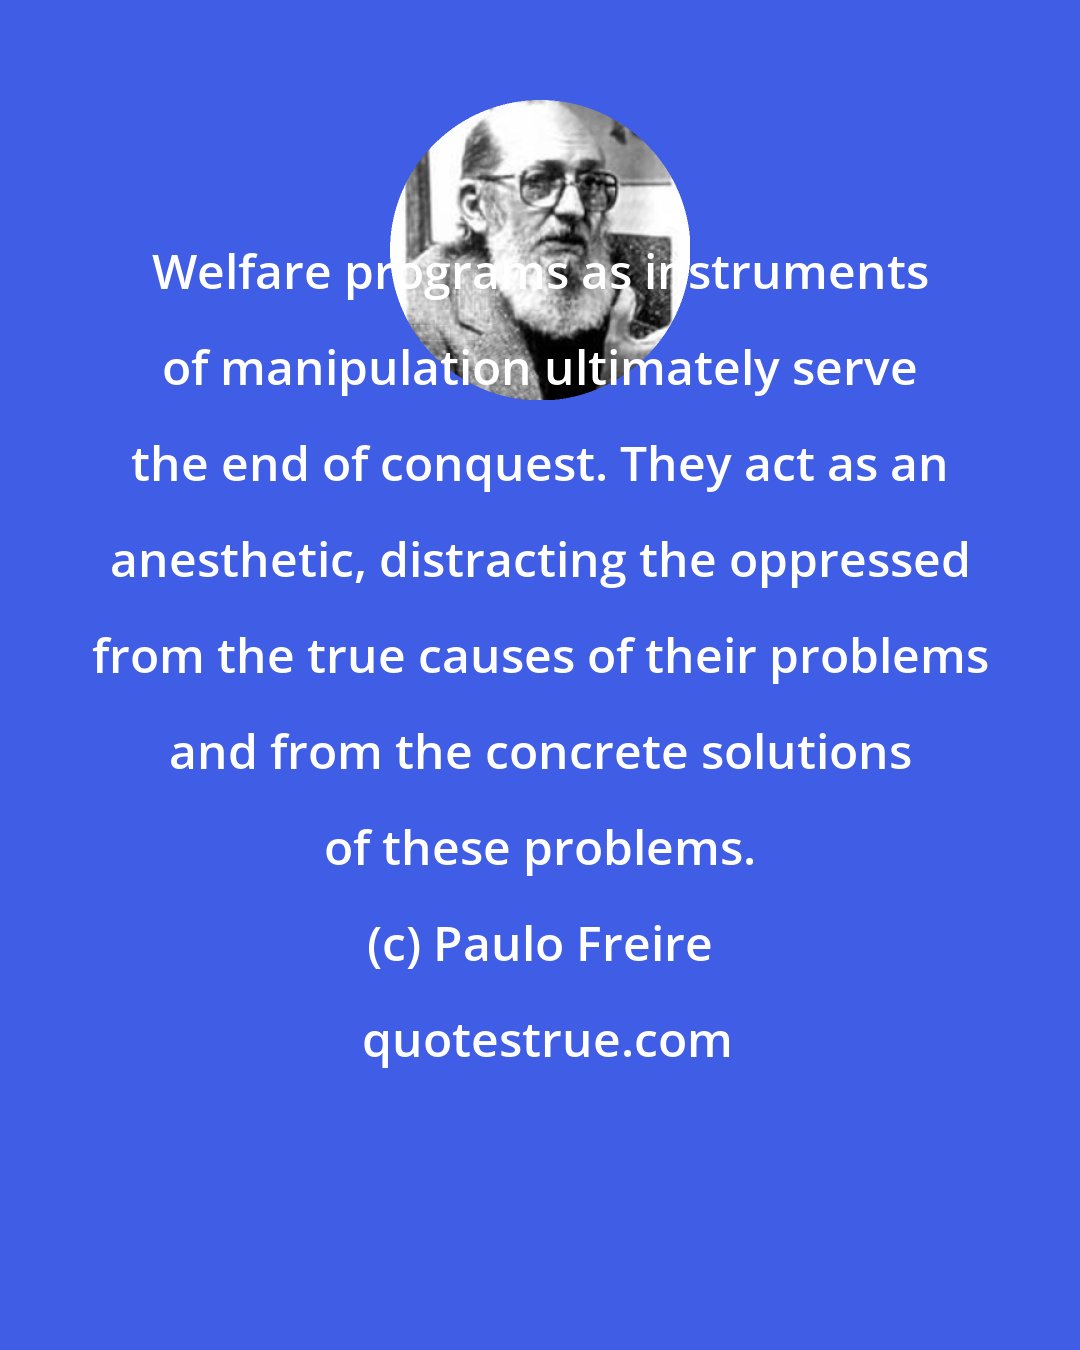 Paulo Freire: Welfare programs as instruments of manipulation ultimately serve the end of conquest. They act as an anesthetic, distracting the oppressed from the true causes of their problems and from the concrete solutions of these problems.